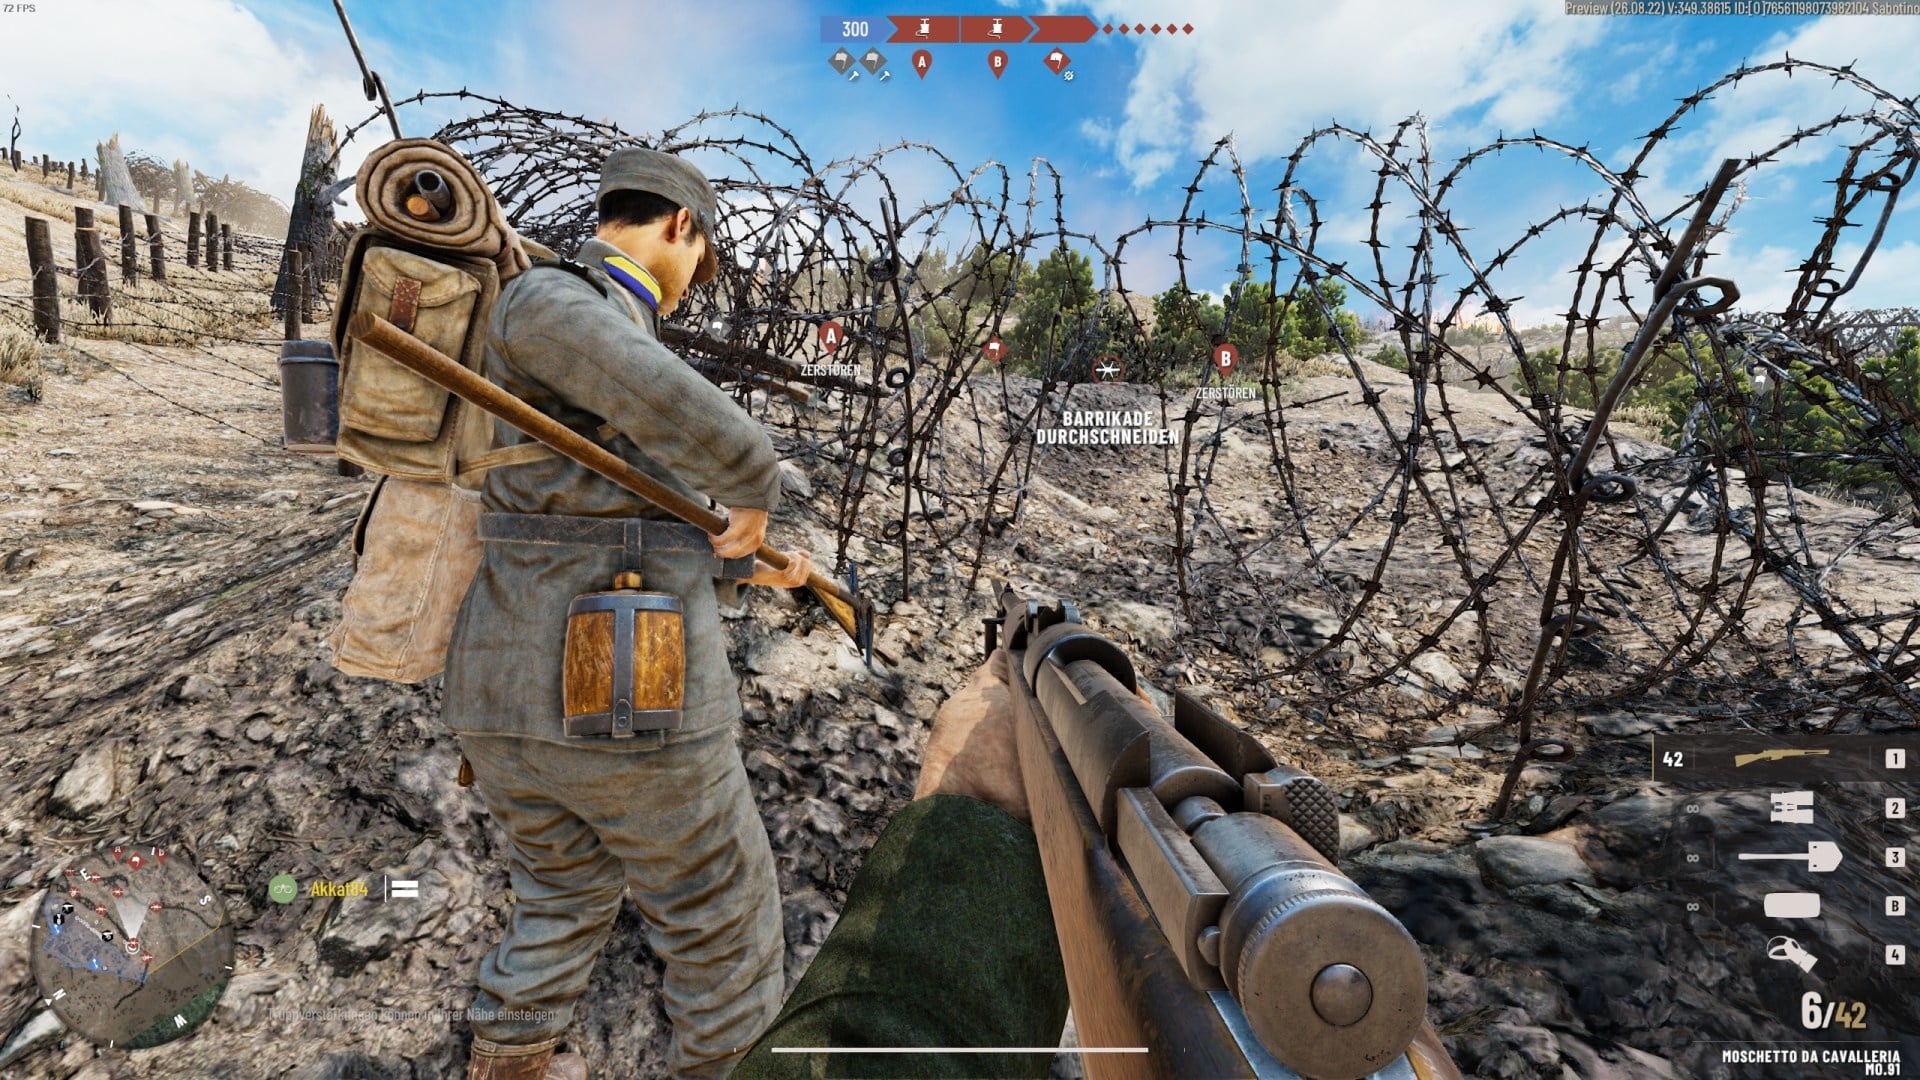 (When advancing we have to remove barbed wire with special tools.)